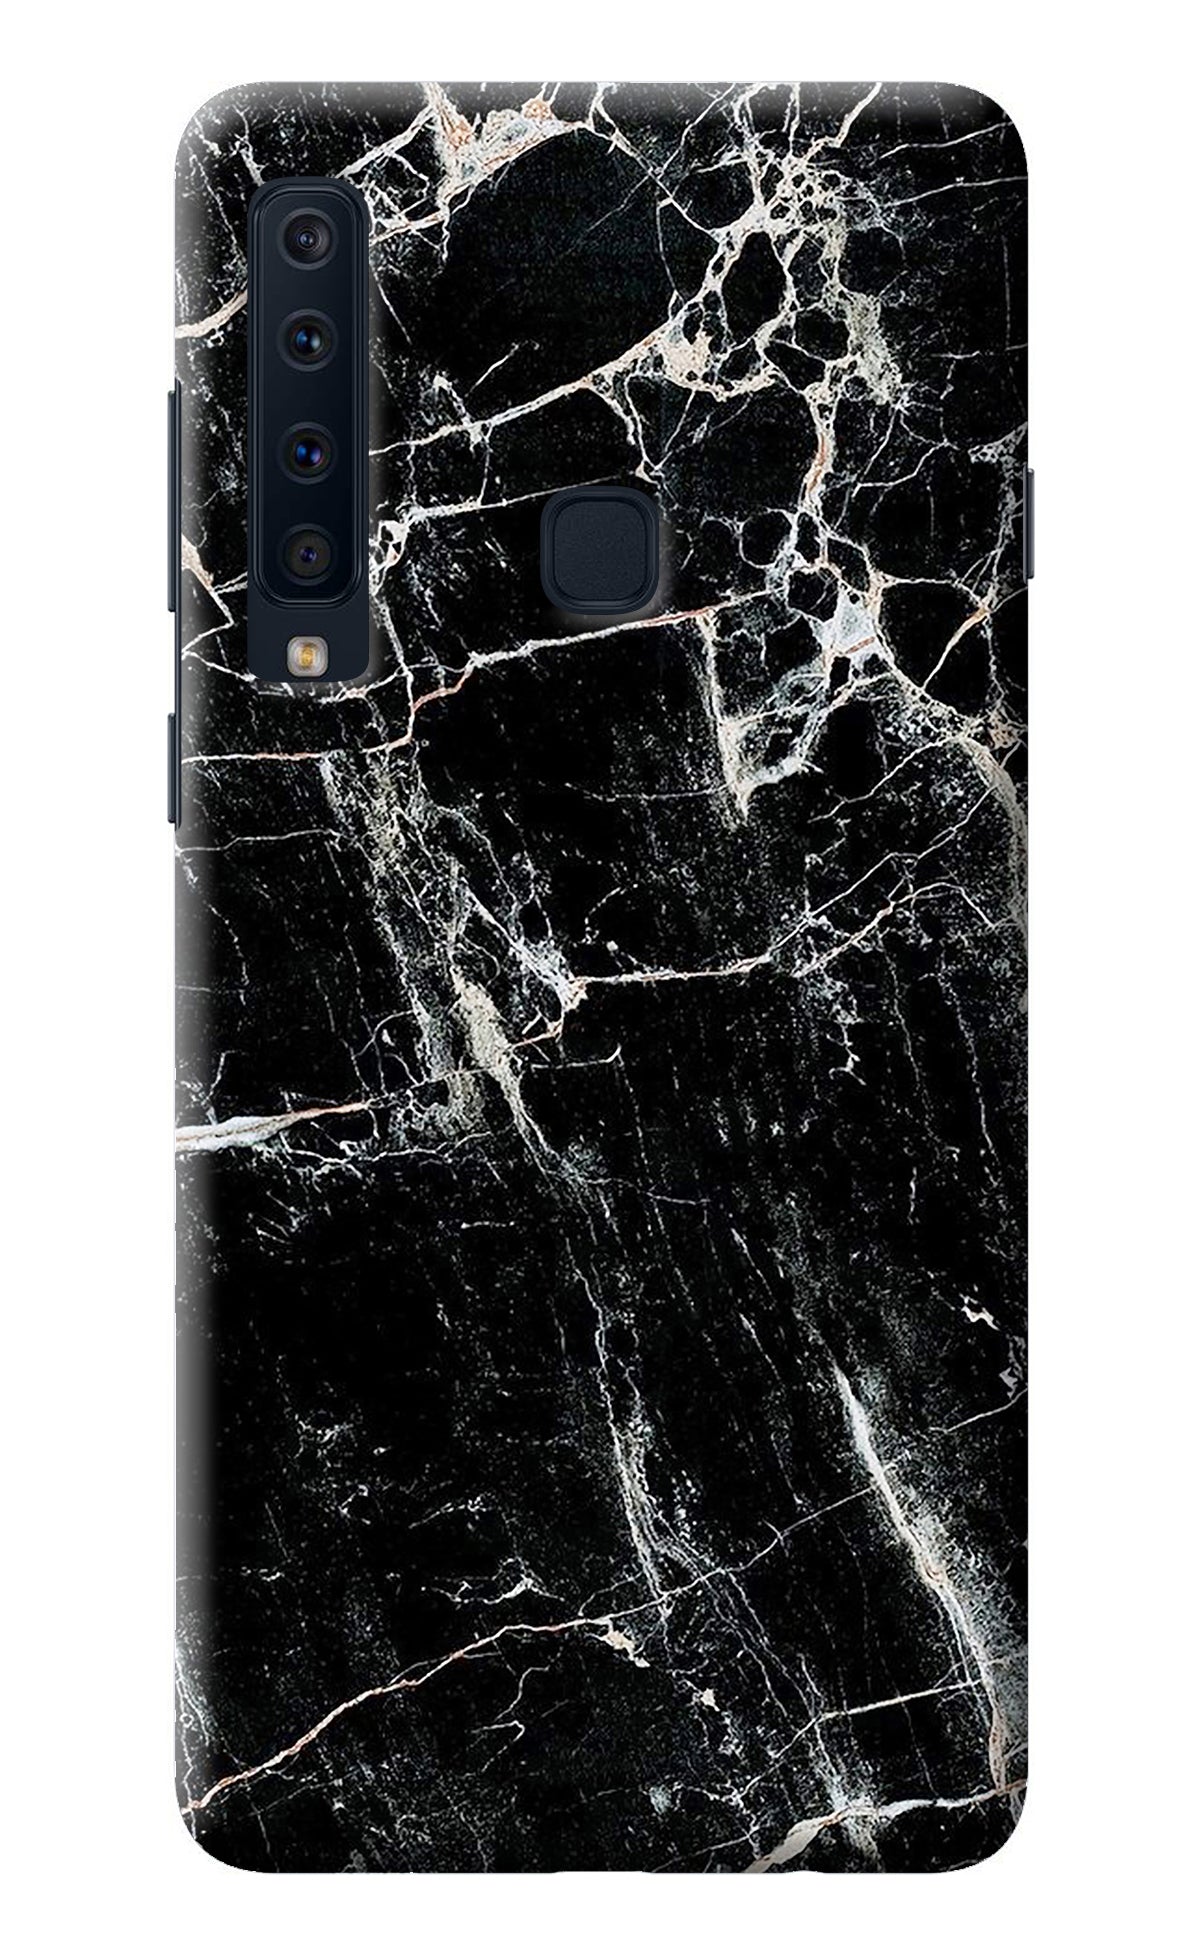 Black Marble Texture Samsung A9 Back Cover